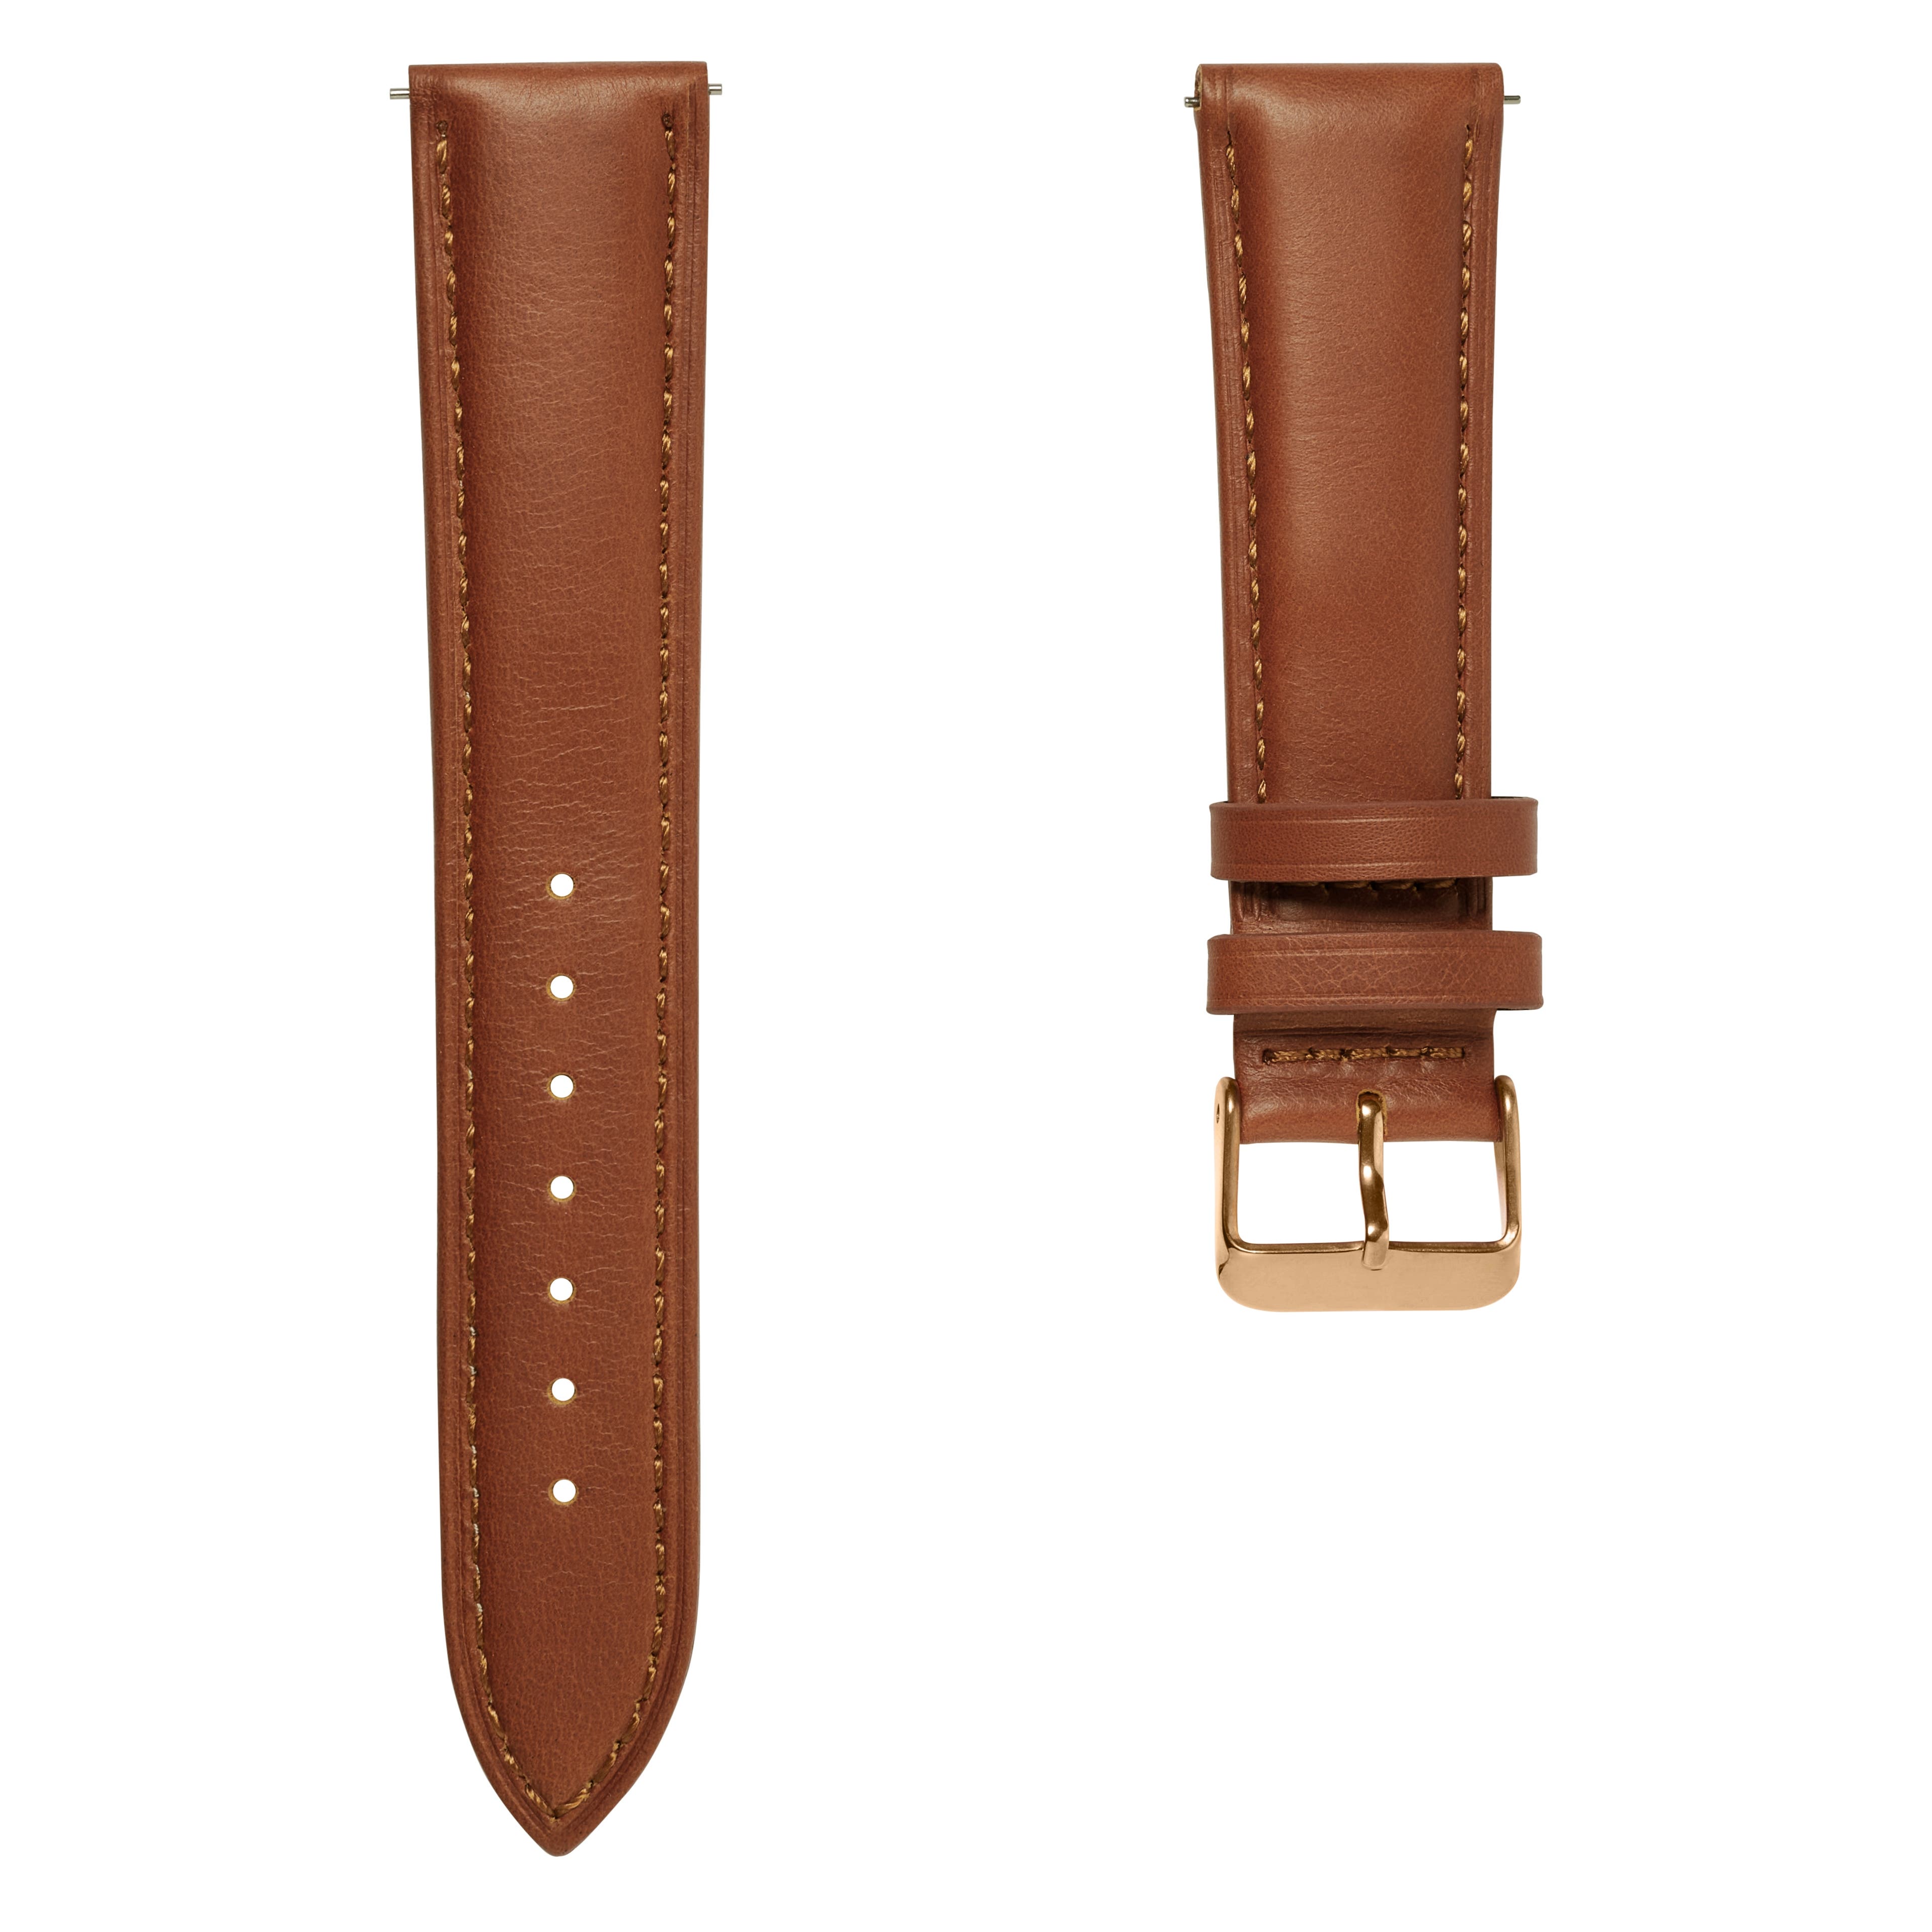 18mm Tan Leather Watch Strap with Rose Gold-Tone Buckle – Quick Release